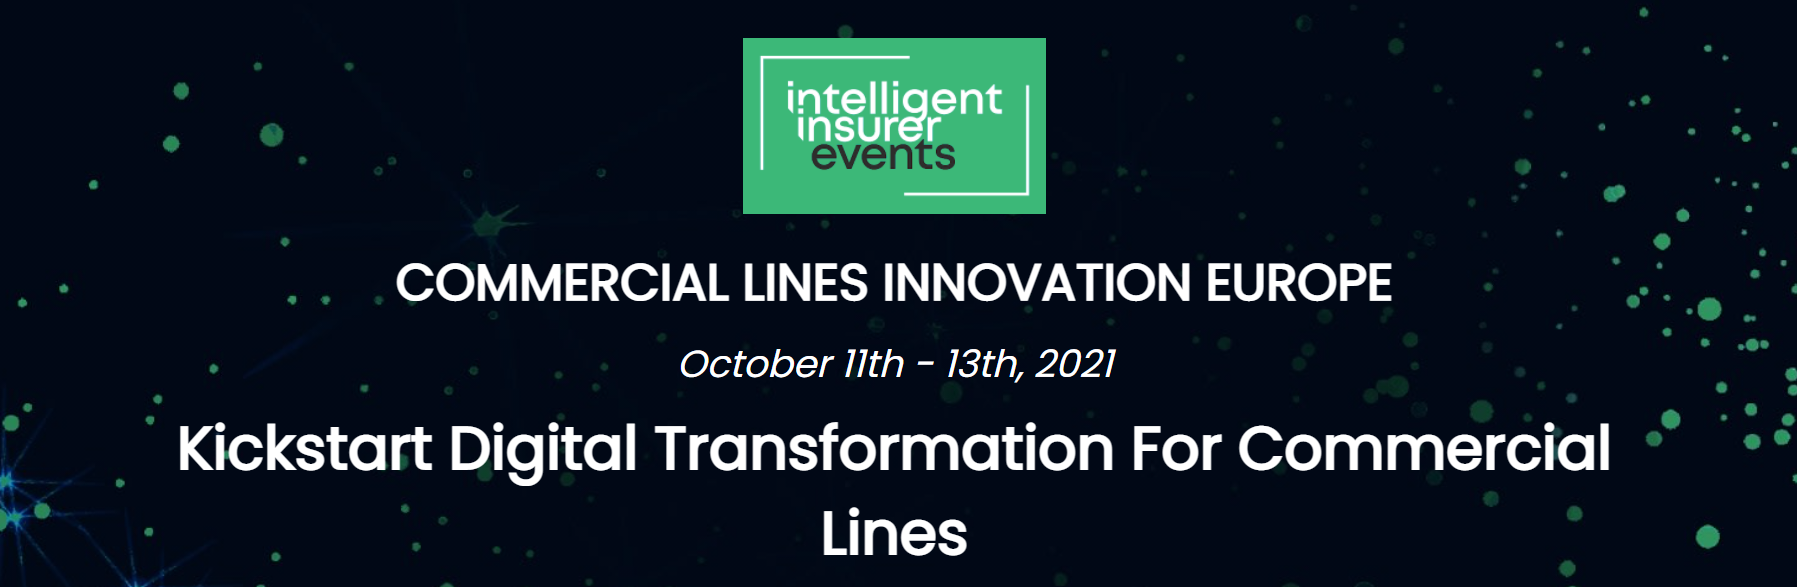 Commercial Lines Innovation Europe